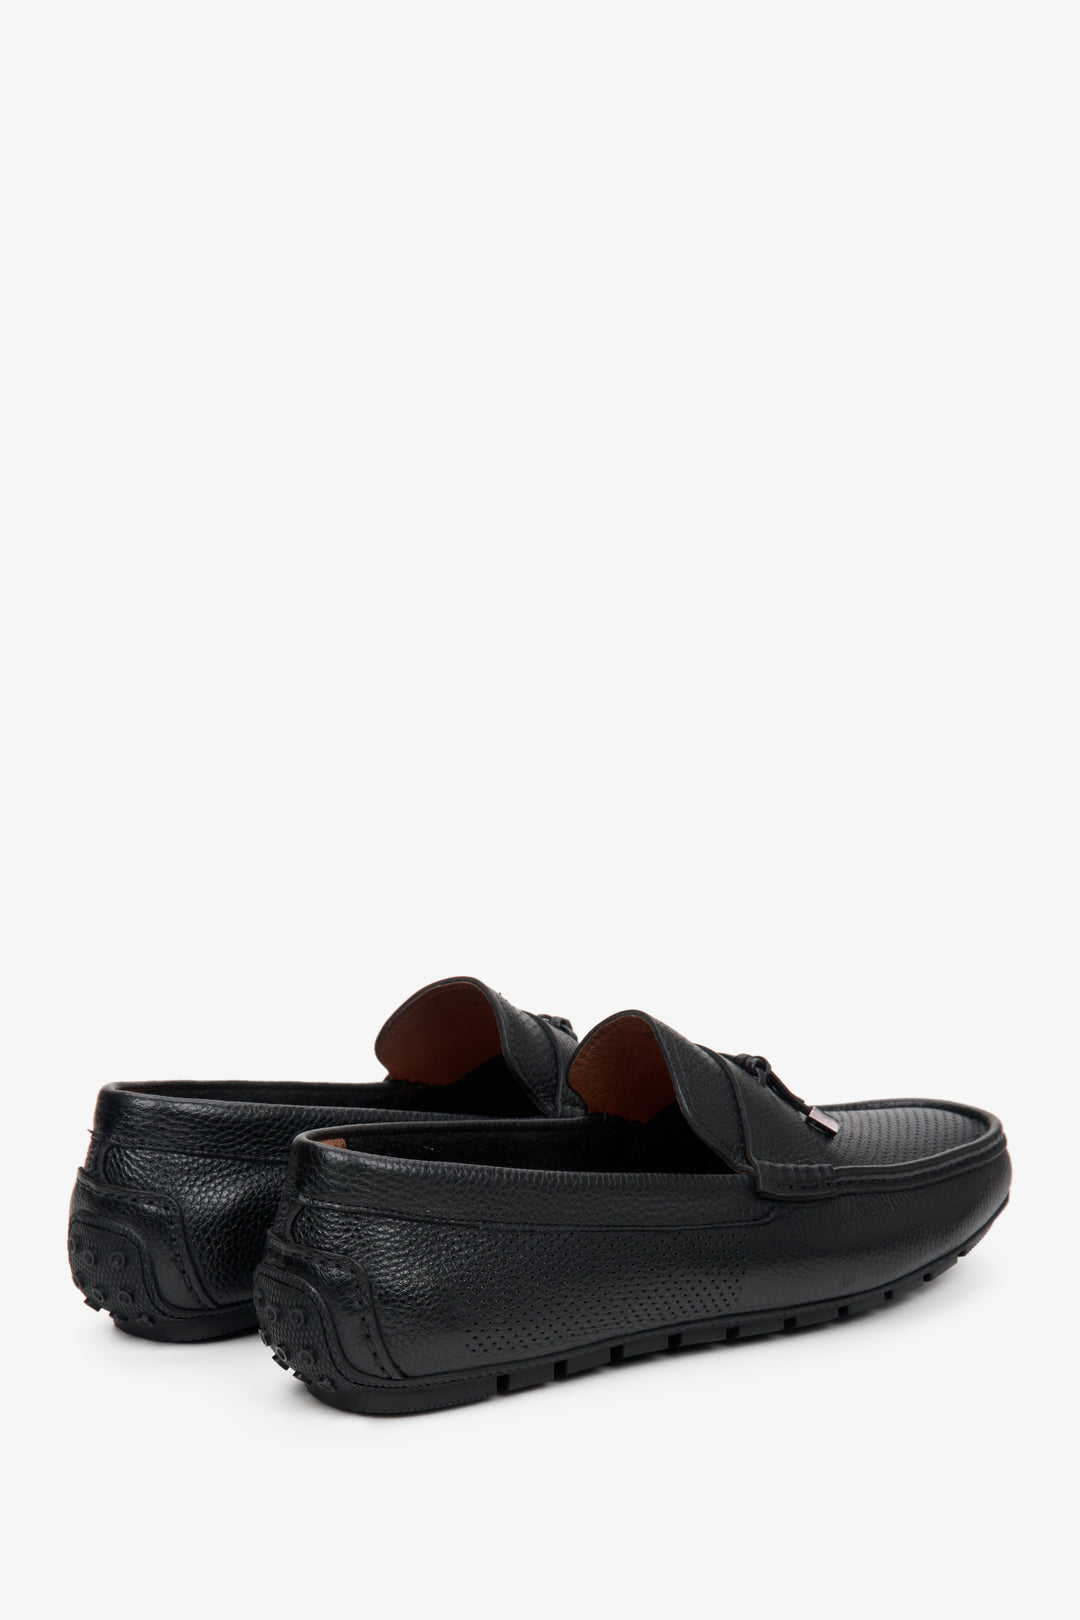 Men's black leather loafers by Estro for fall - close-up on the heel and side seam of the shoes.